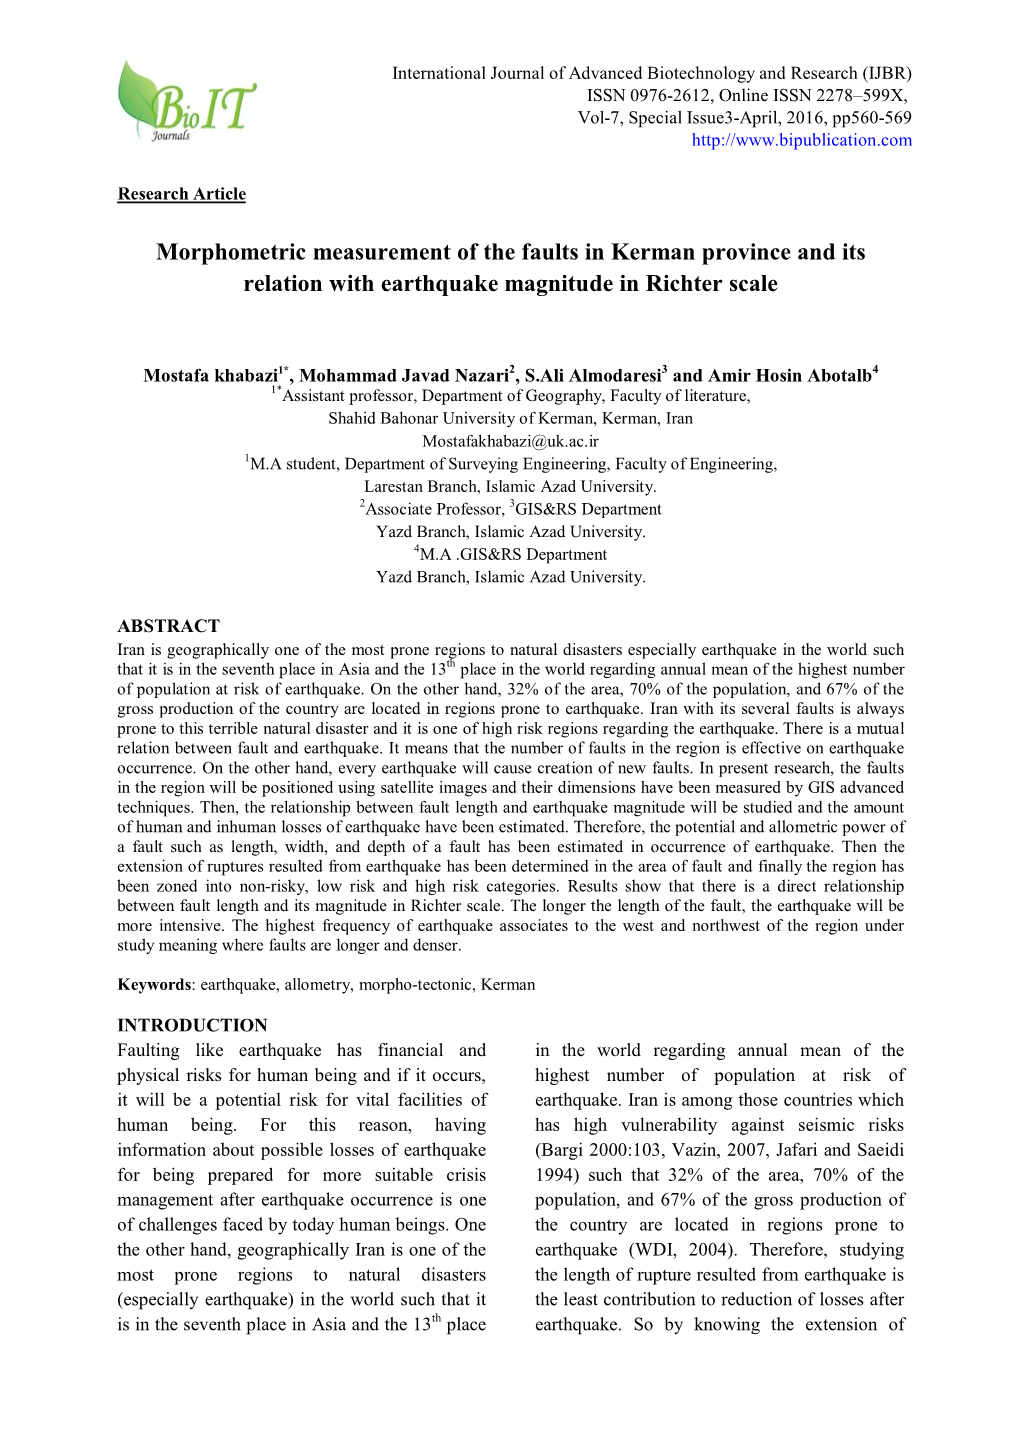 Morphometric Measurement of the Faults in Kerman Province and Its Relation with Earthquake Magnitude in Richter Scale